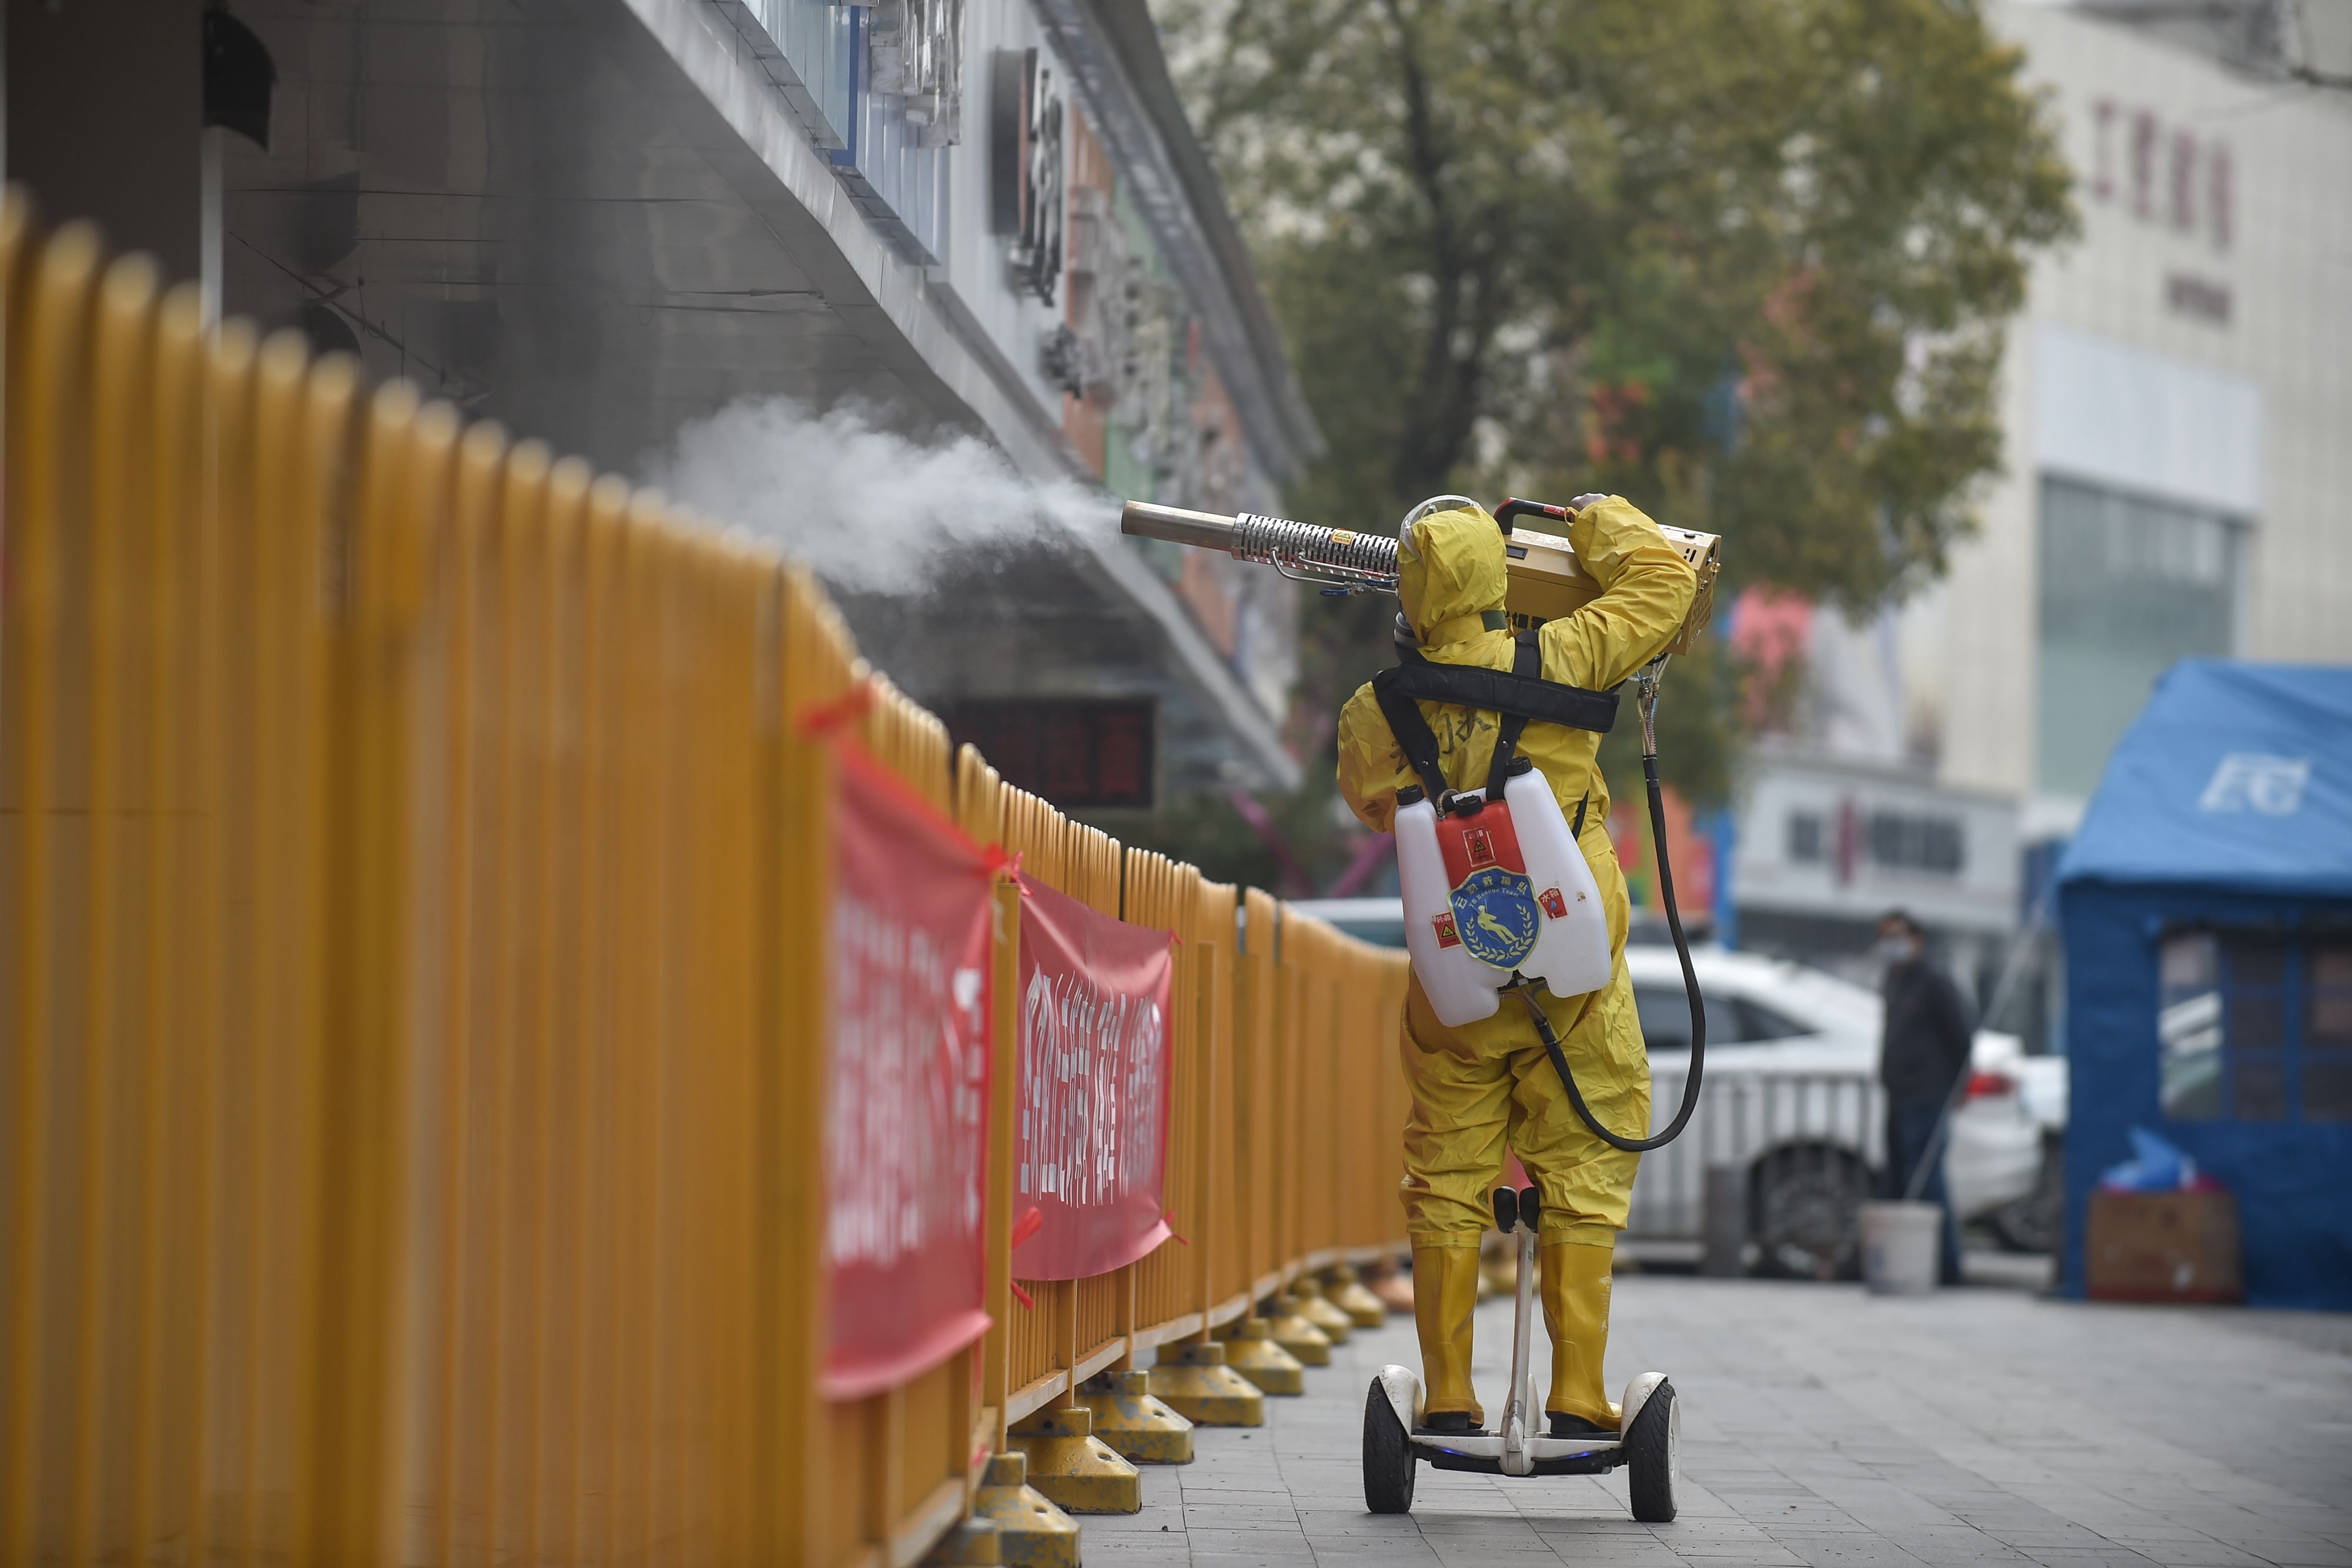 A medical staff member sprays disinfectant at a residential area in Wuhan on March 11.